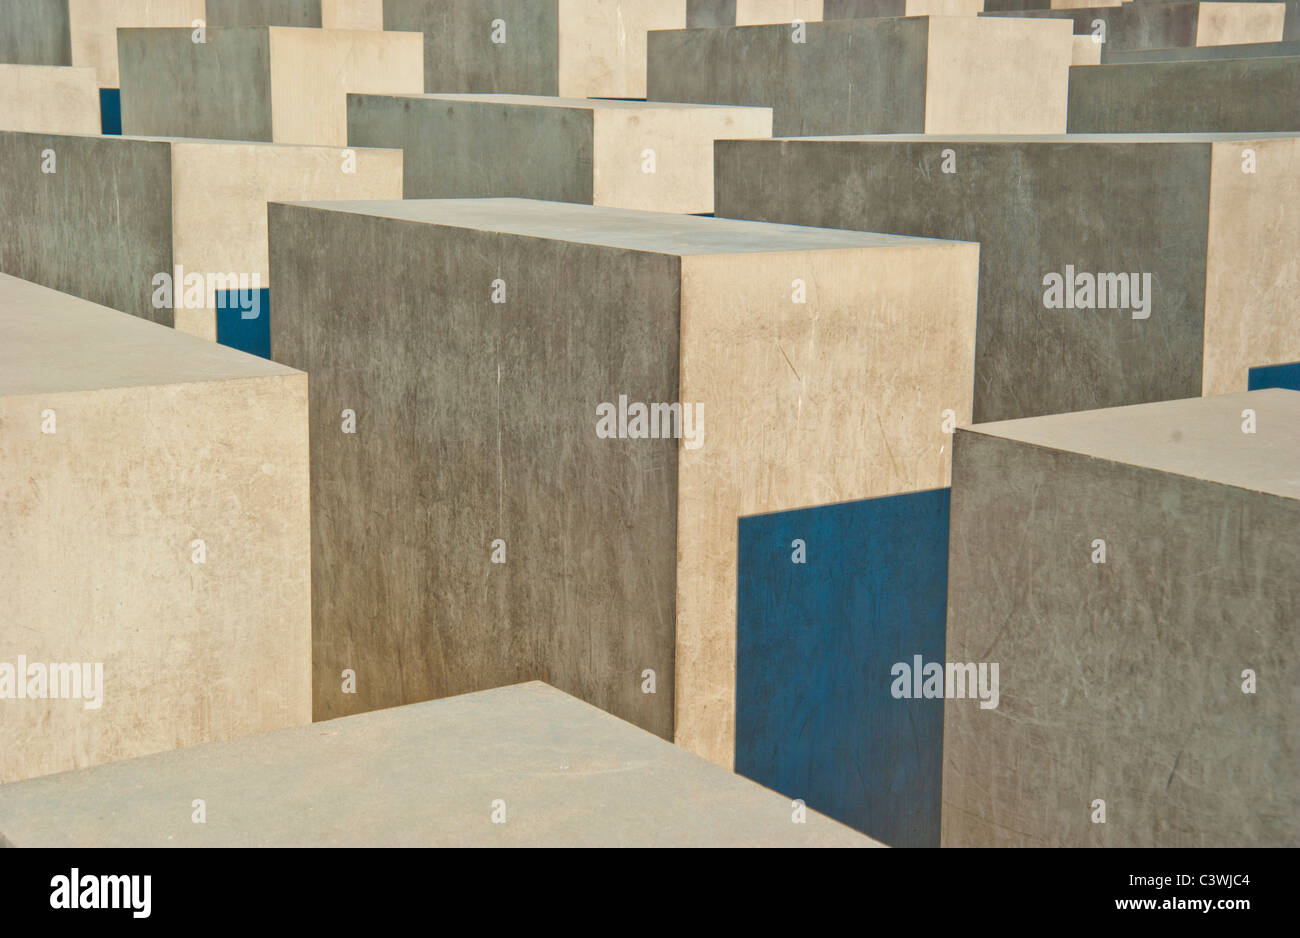 Memorial to the Murdered Jews of Europe, Memorial for Holocaust victims, Berlin, Germany Stock Photo